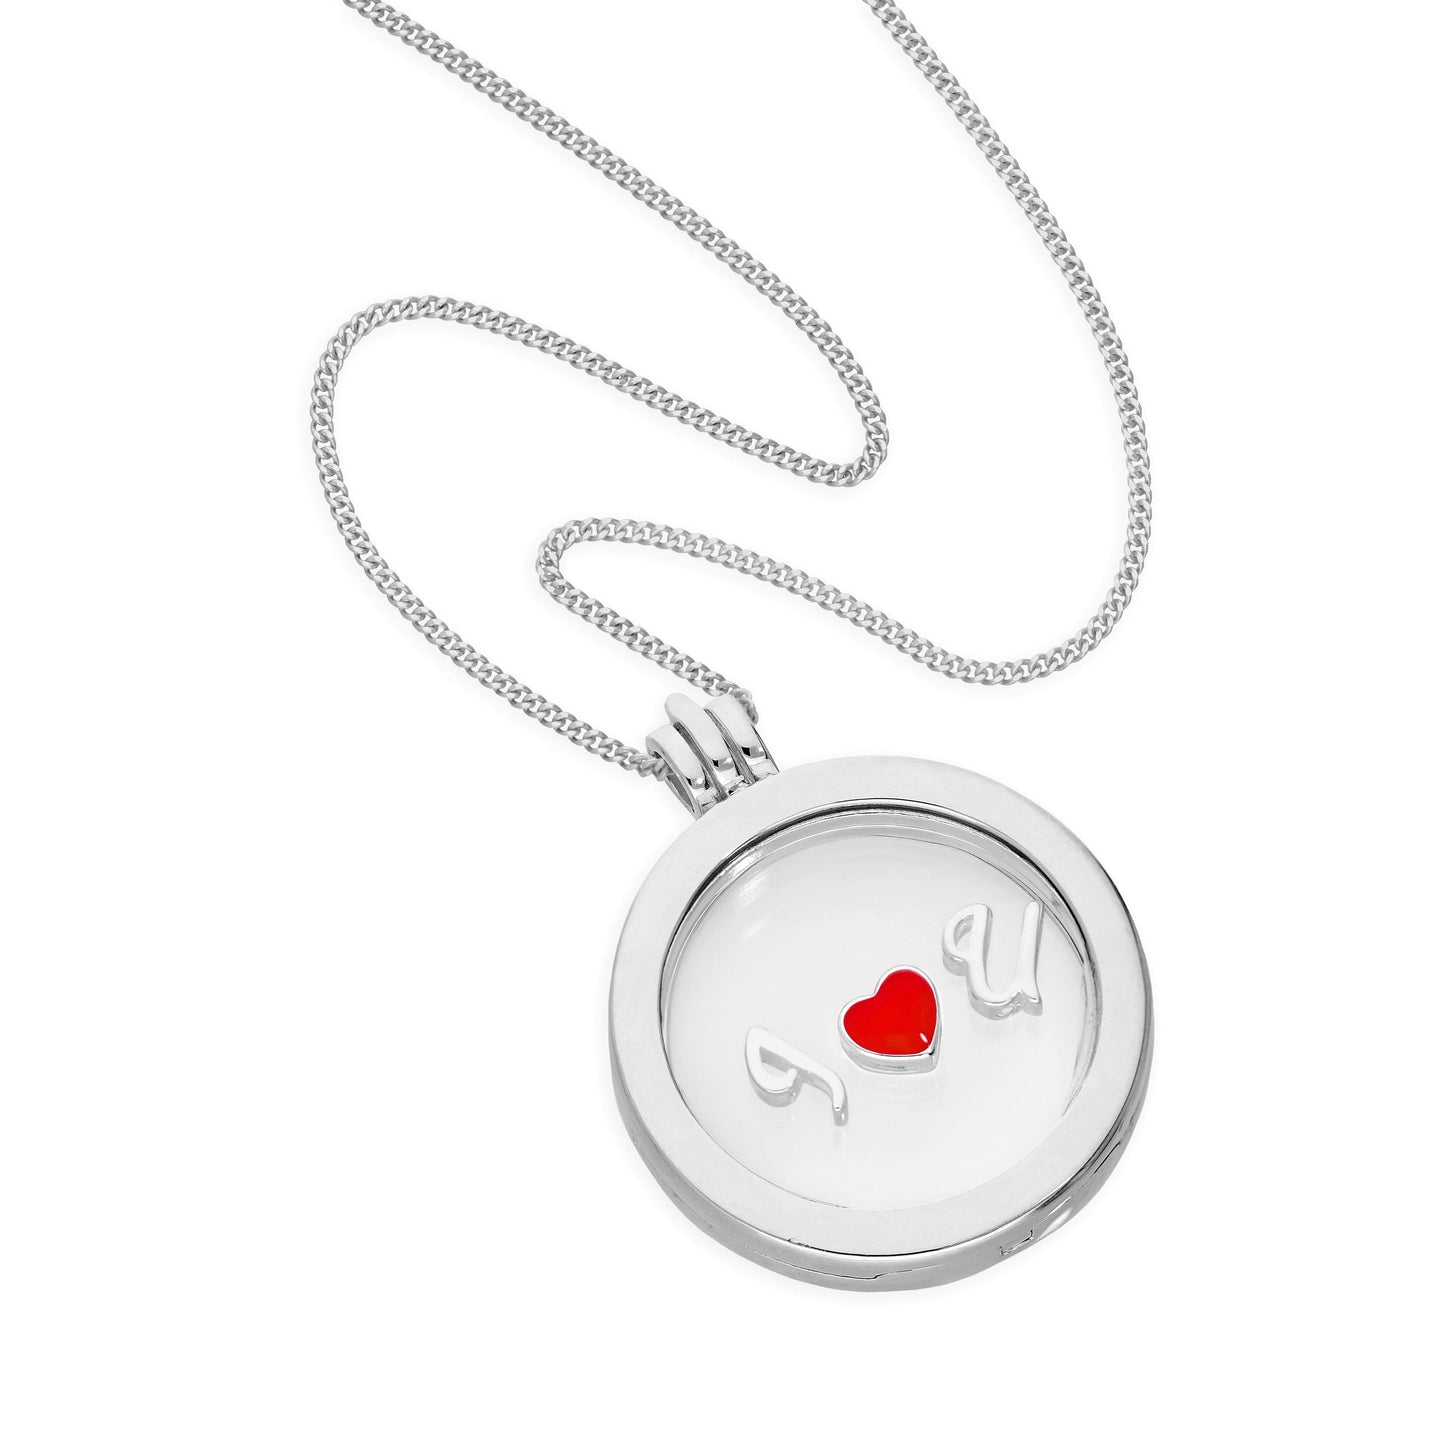 Large Sterling Silver Round Floating Charm Locket on Chain 16 - 24 Inches